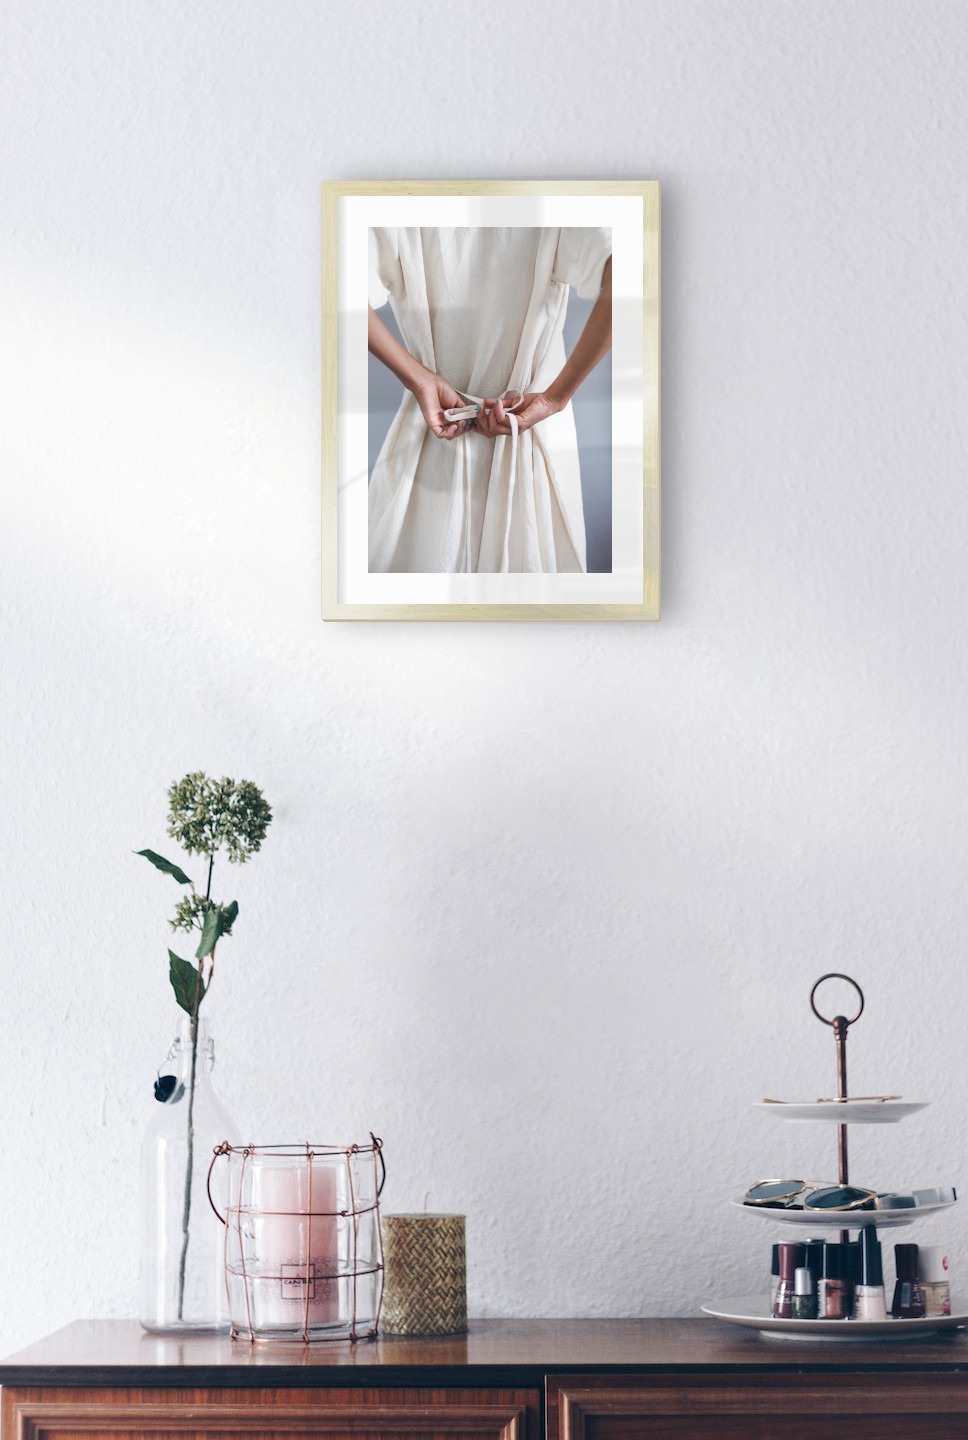 Gallery wall with picture frame in gold in size 30x40 with print "Dress with waistband"